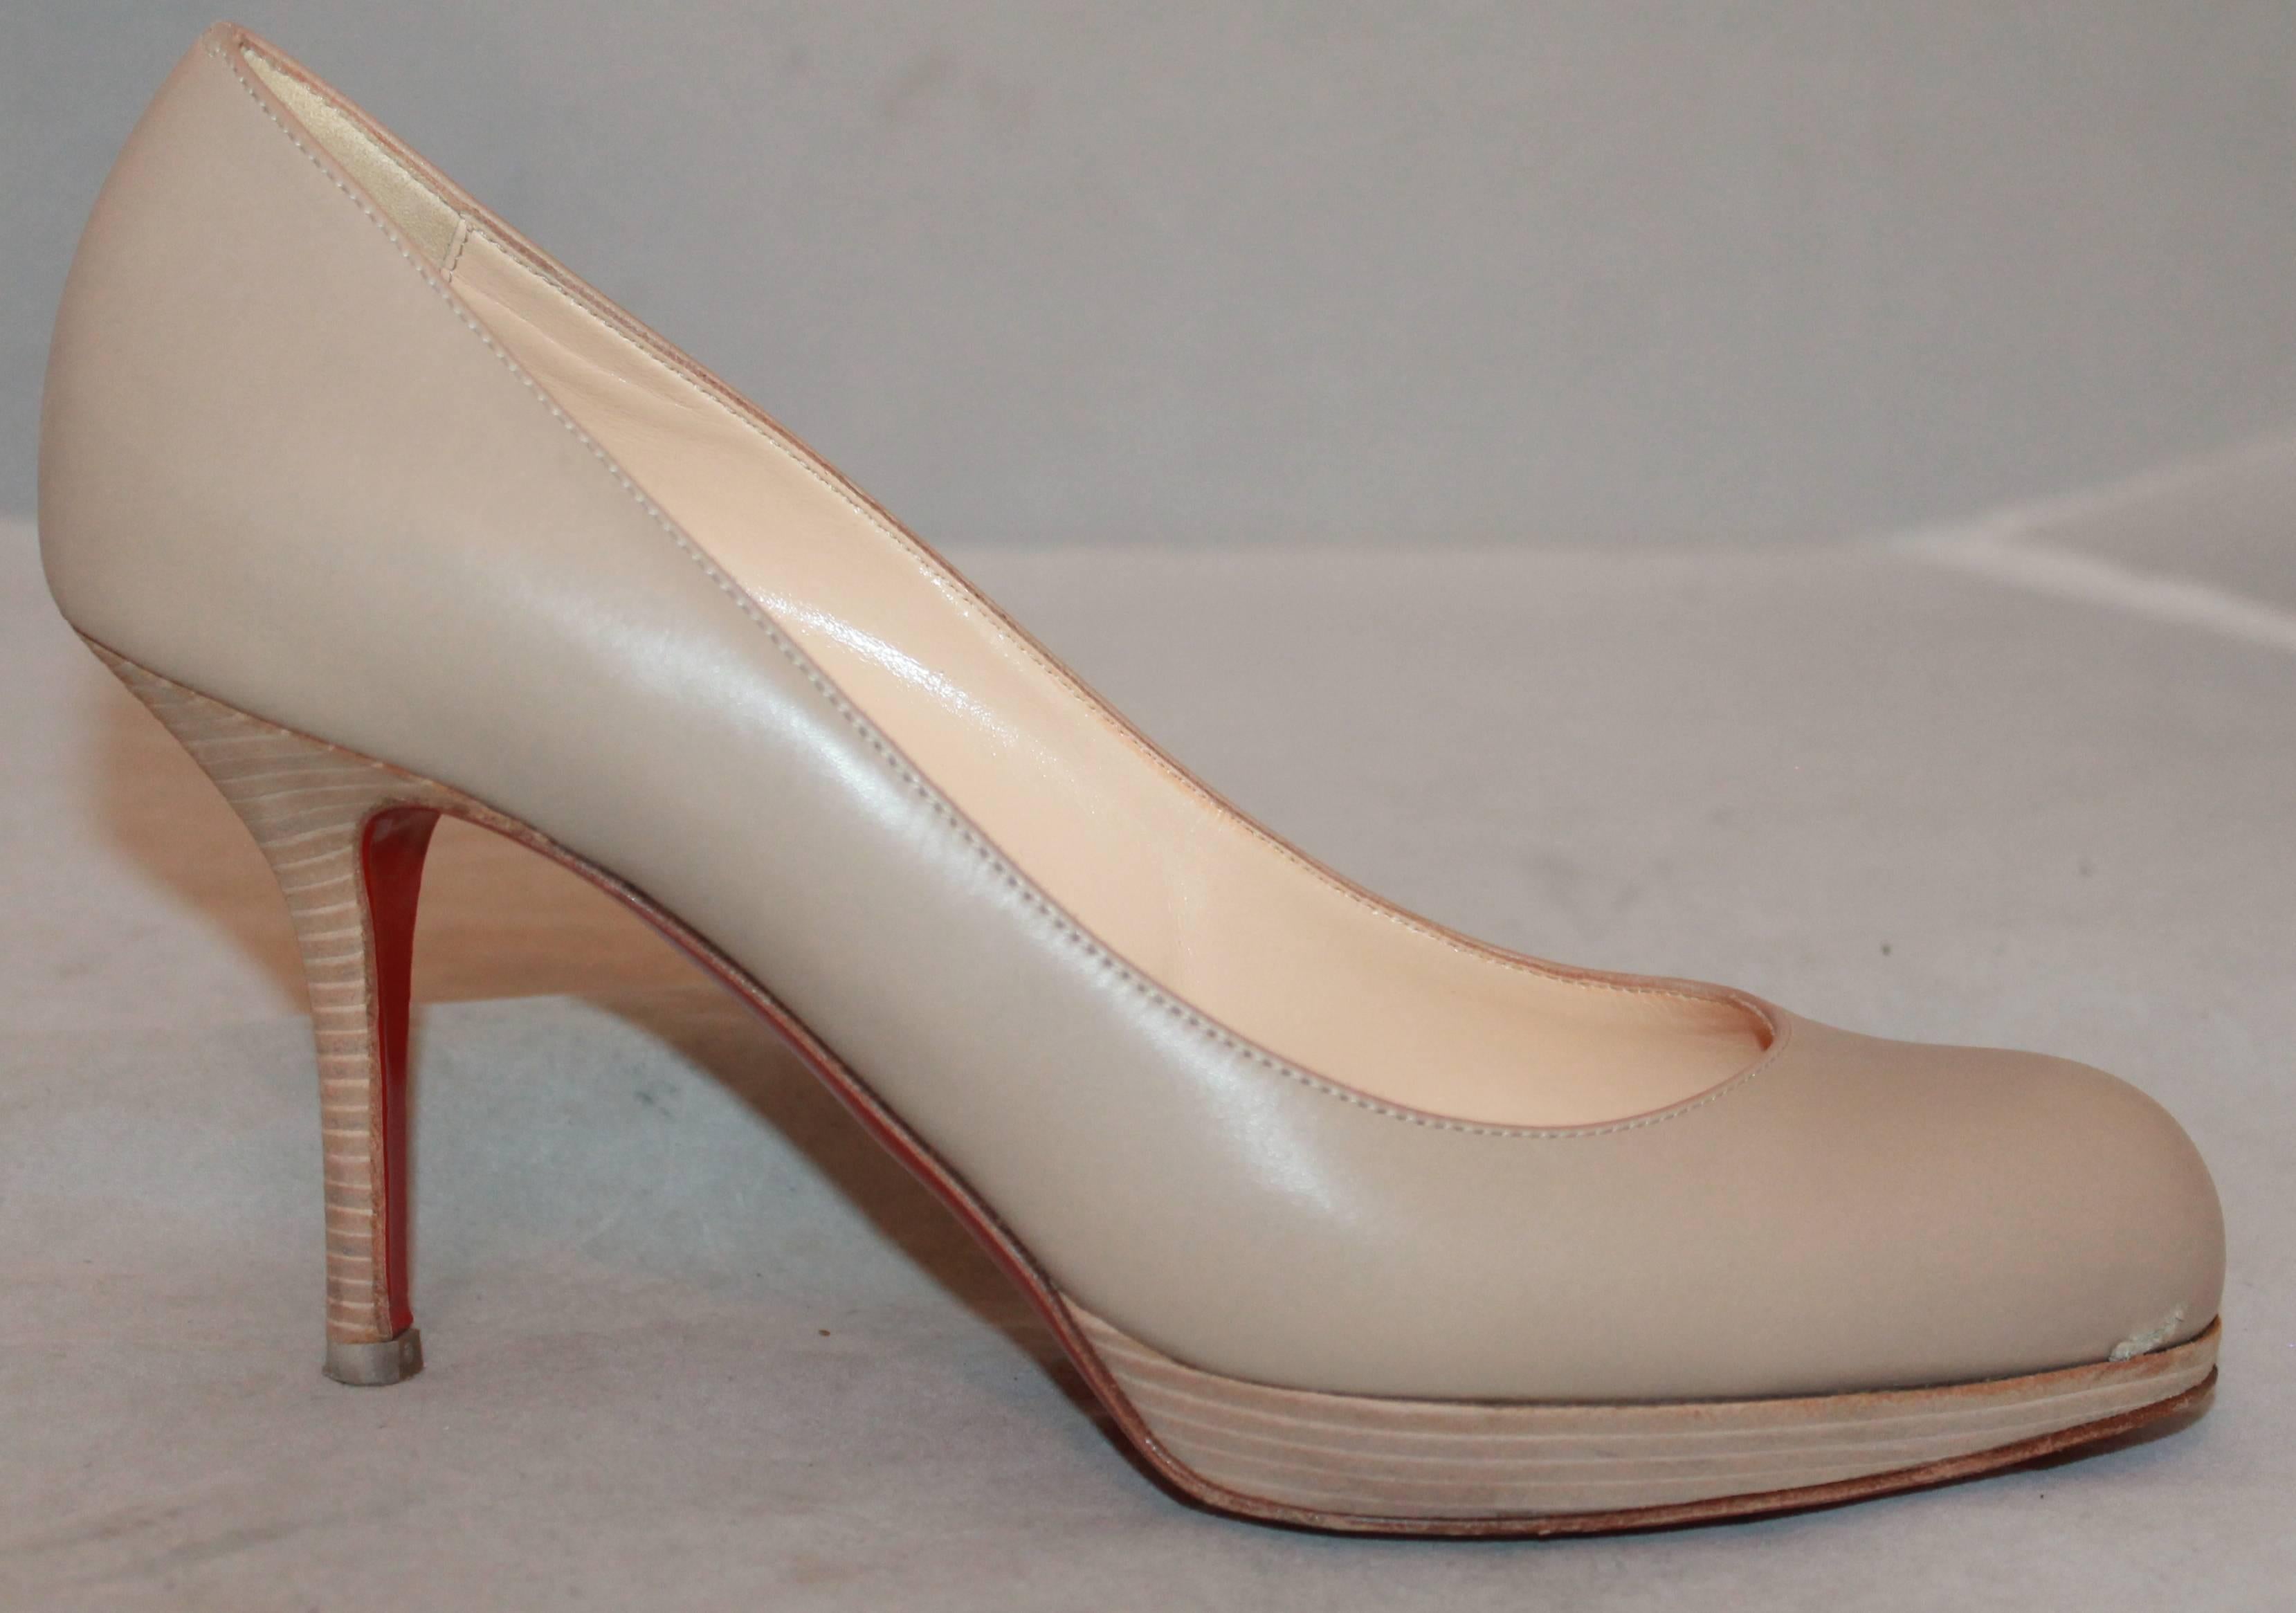 Christian Louboutin Nude Leather Wooden Pumps - 37.5. These pumps are in fair condition with some wear to the leather and more visible wear seen on the back of the heel. The bottom also has some minor wear and one area of a pump has a scuff as shown